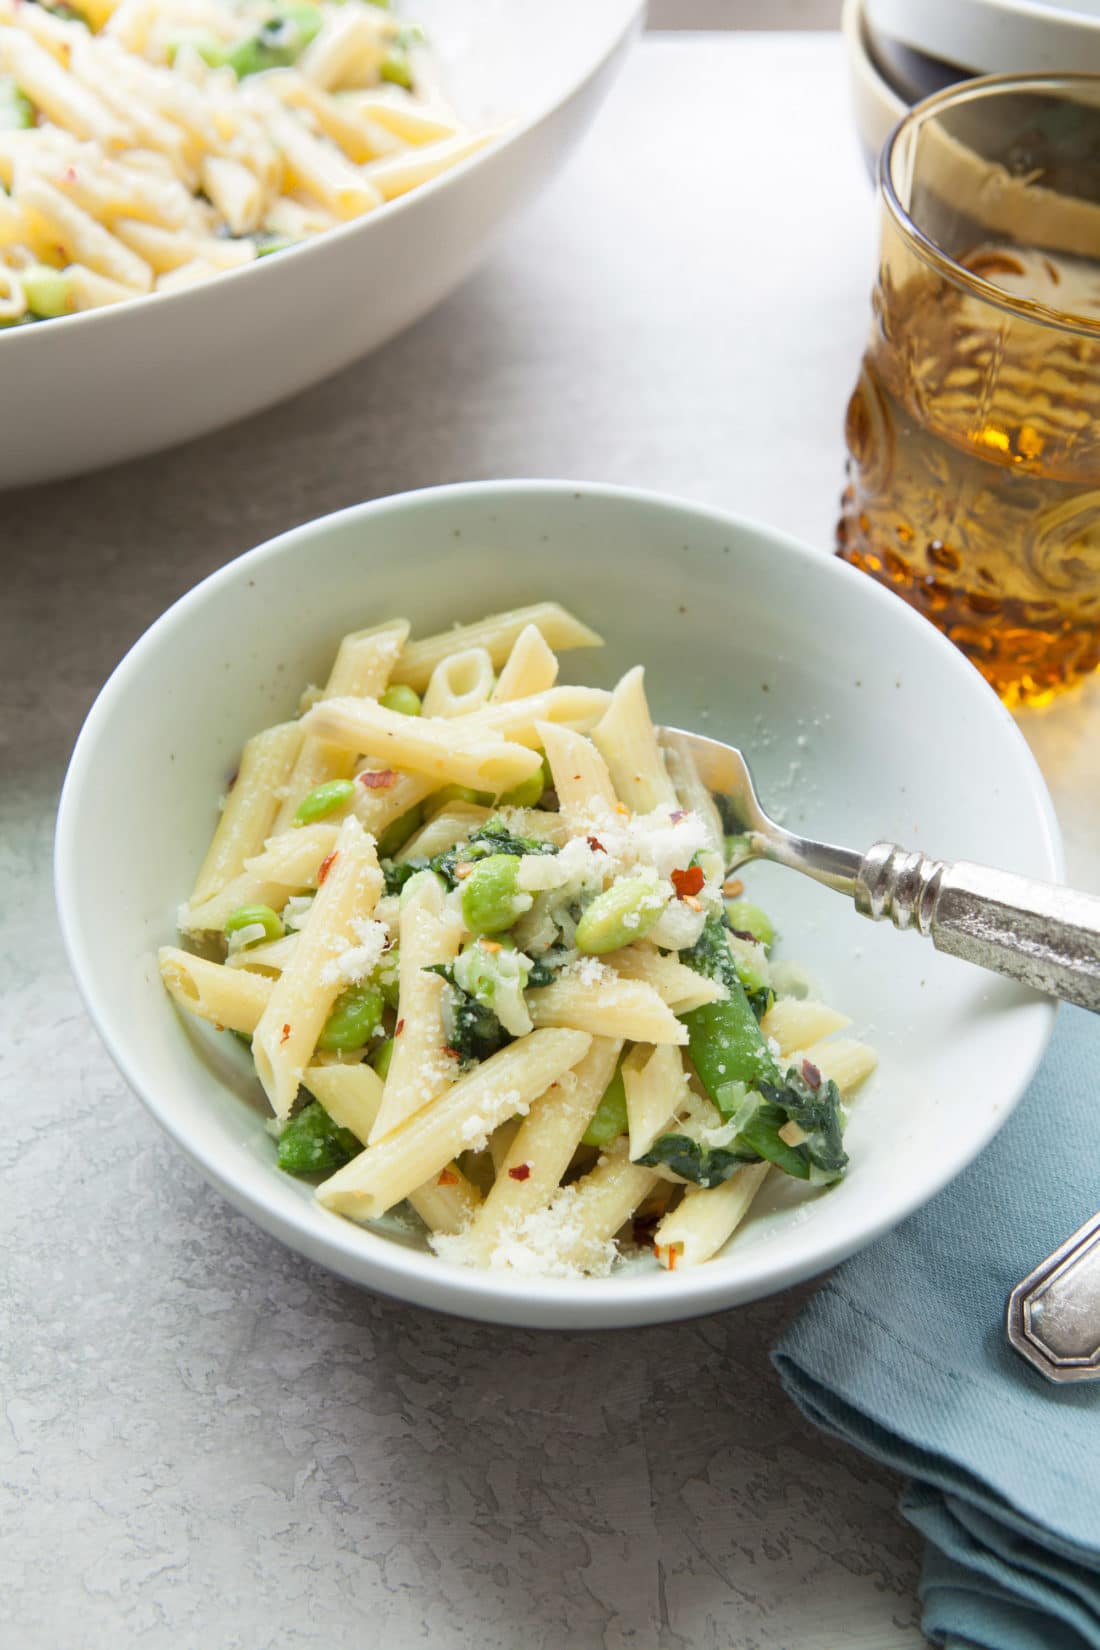 Small bowl of Pasta with Ramps, Edamame, and Snap Peas in a Light Parmesan Cream Sauce.